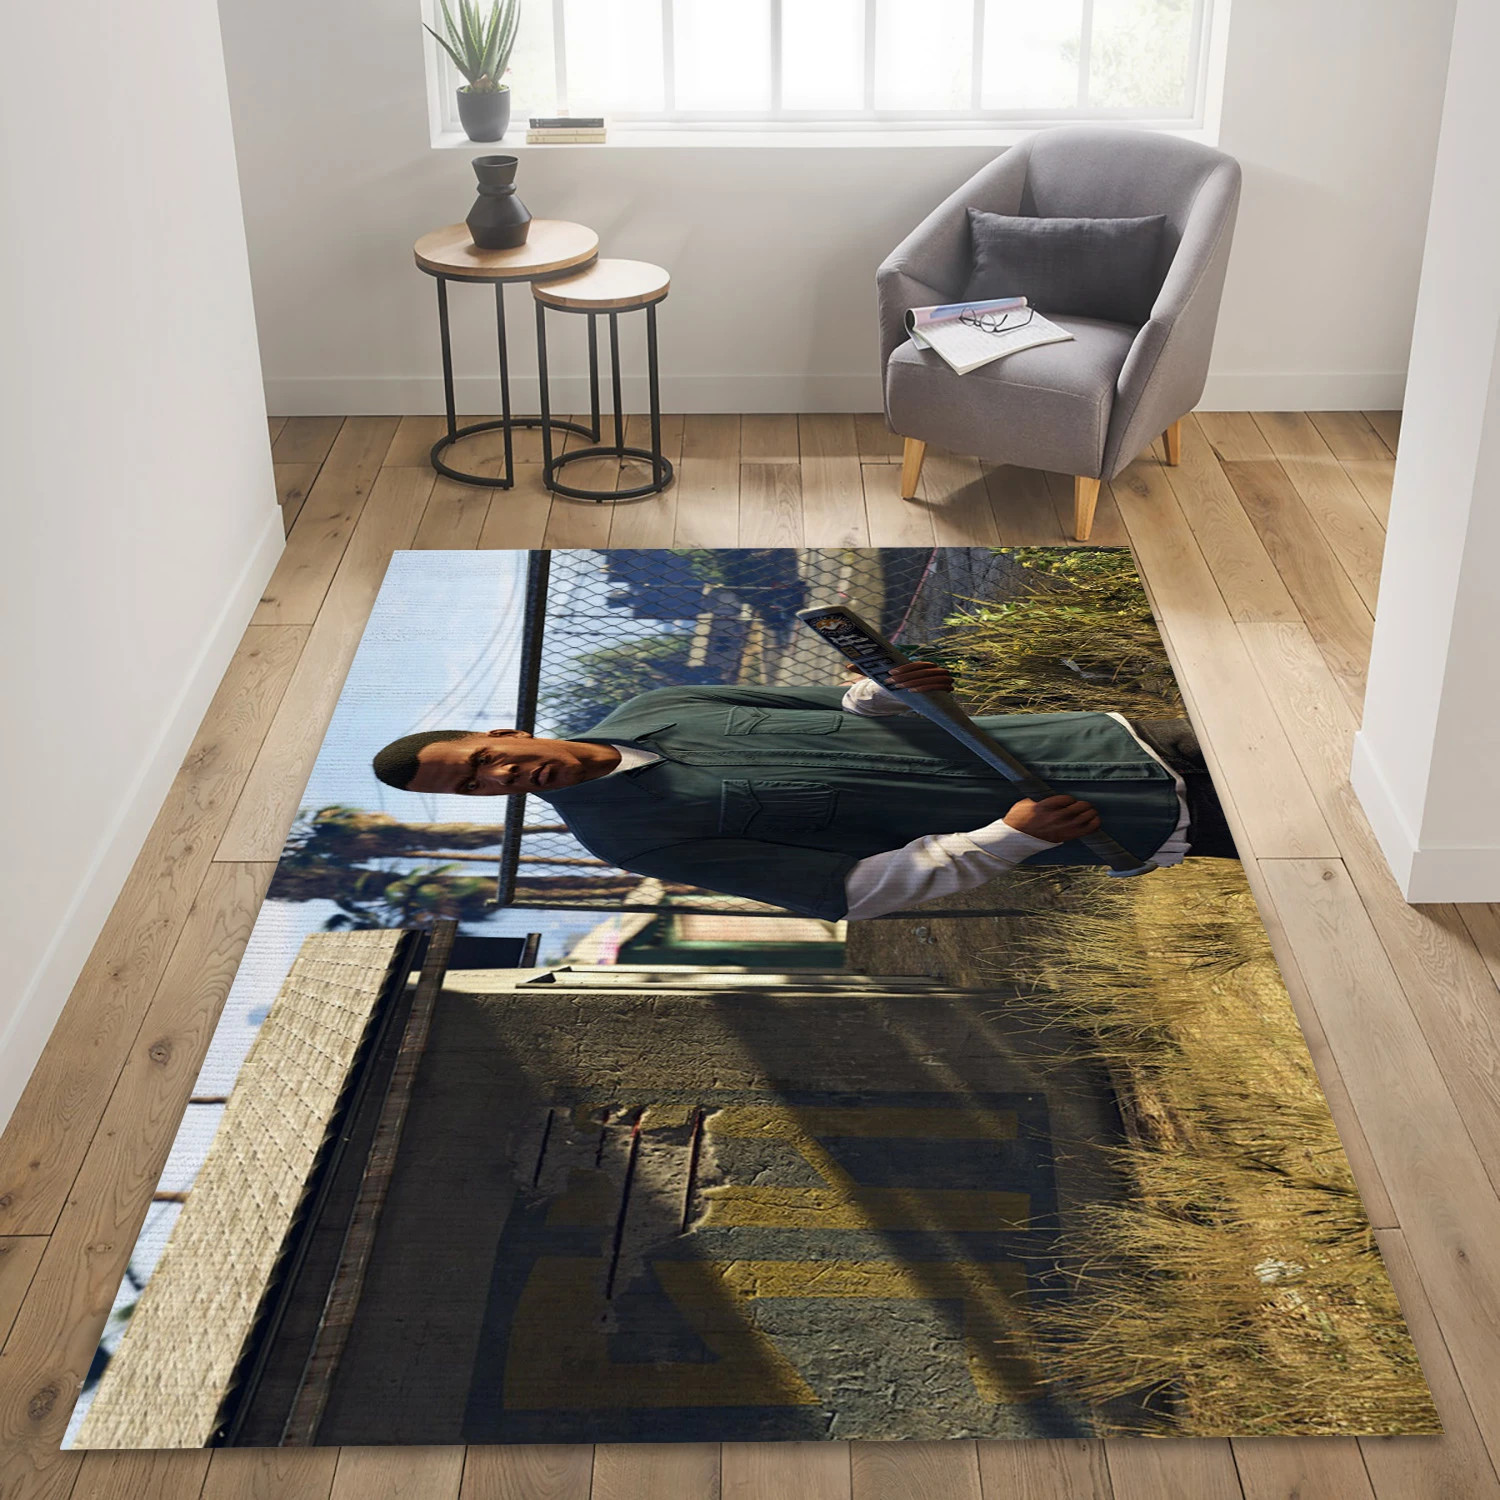 Grand Theft Auto V Game Area Rug Carpet, Bedroom Rug - Christmas Gift Decor - Indoor Outdoor Rugs